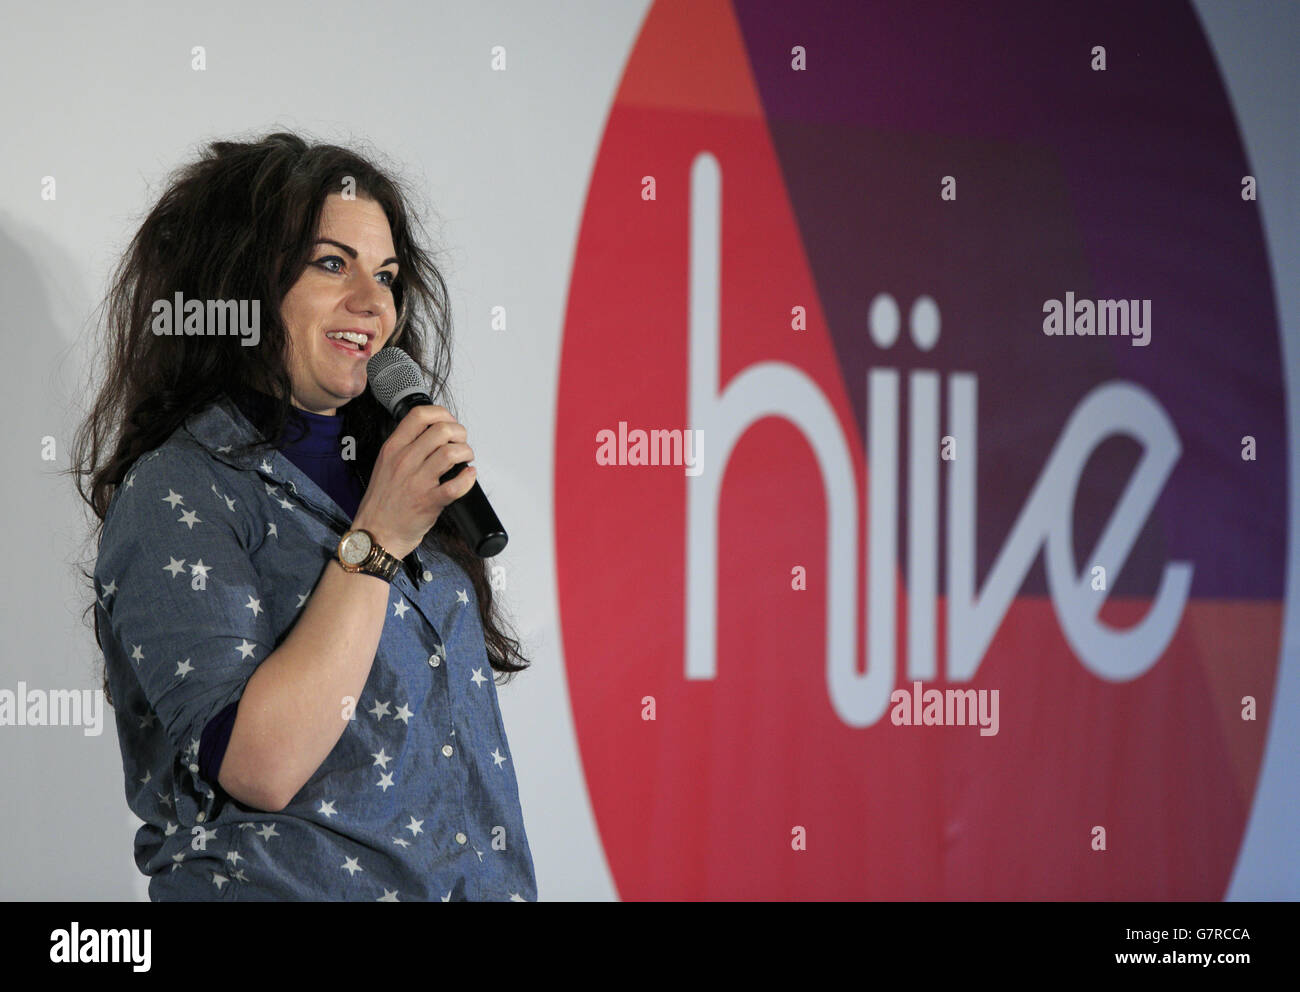 Caitlin Moran at the launch of Hiive.co.uk - a professional networking, collaboration and job-finding tool for UK creatives, at The Trampery in east London. Stock Photo